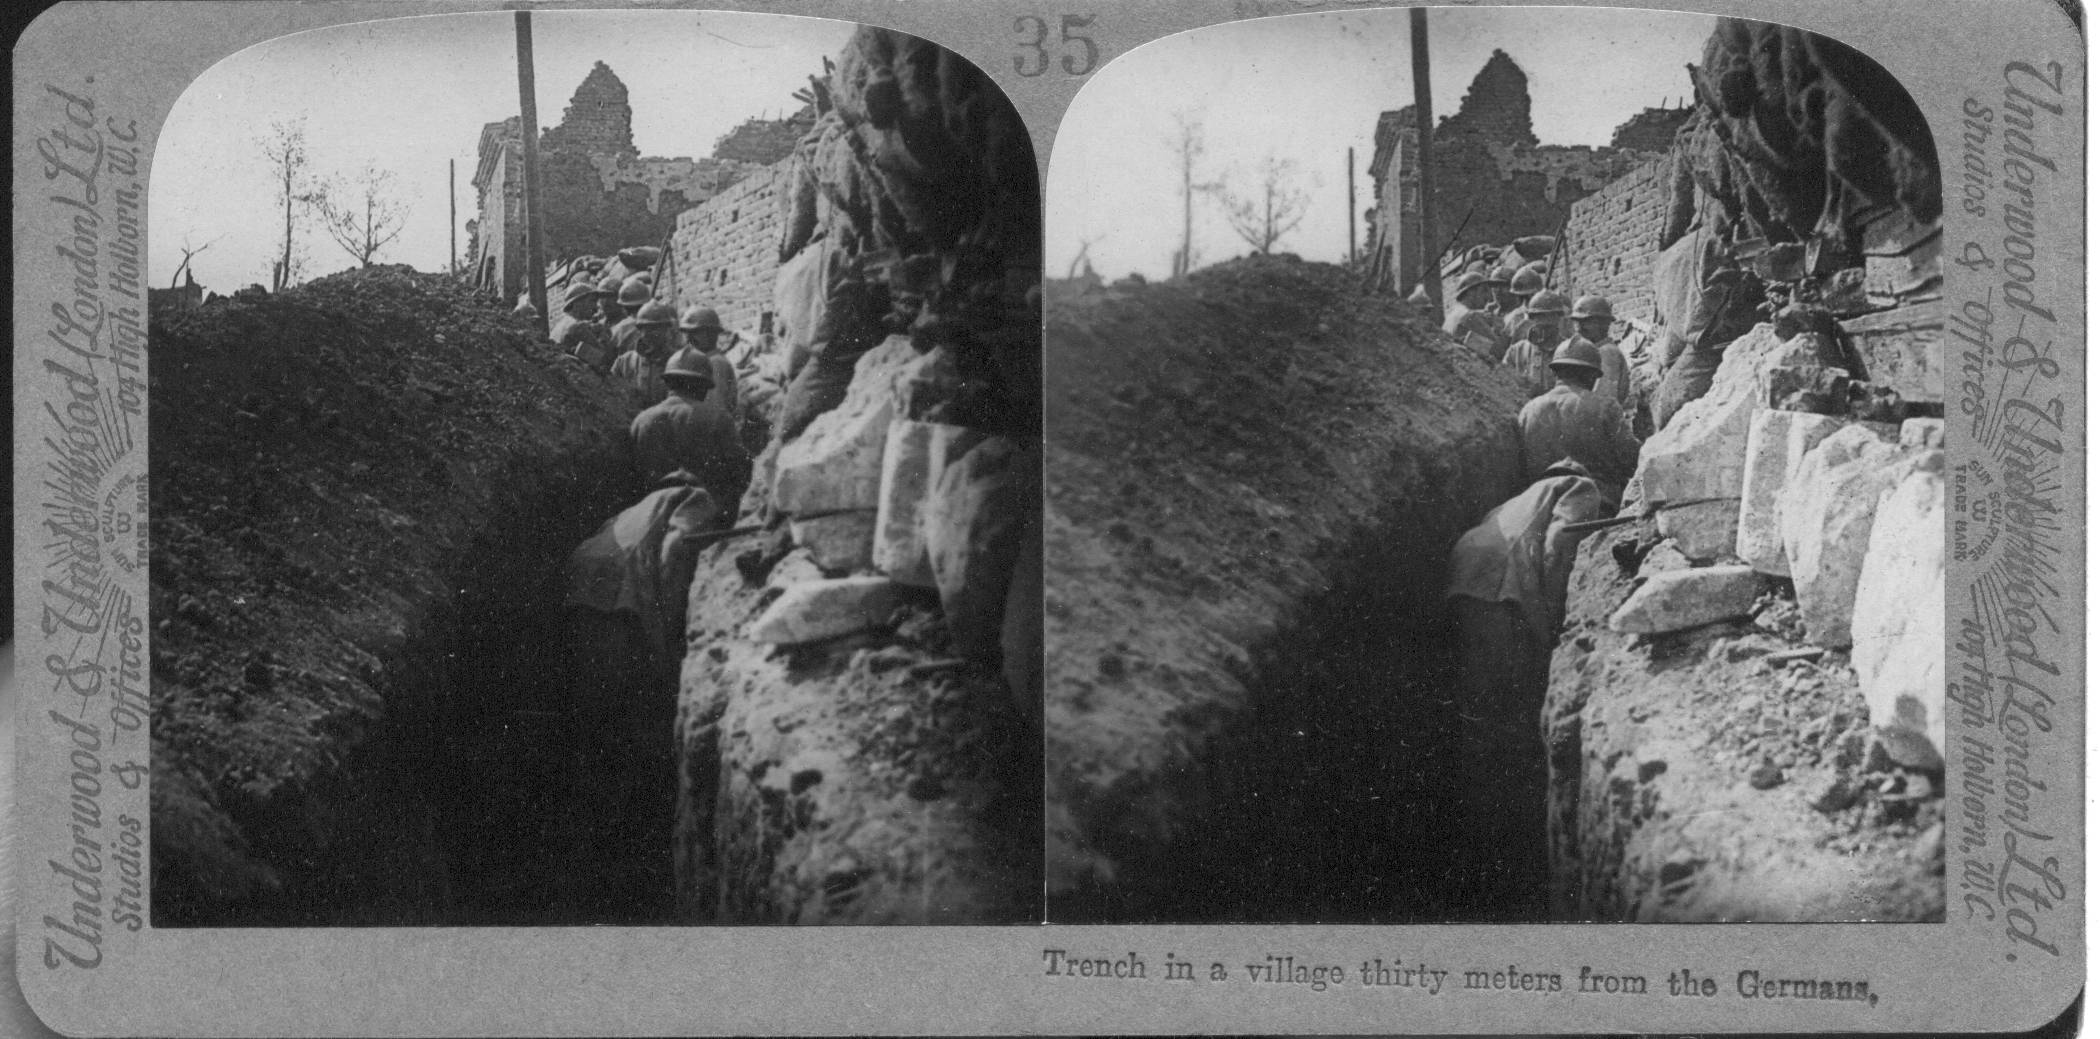 Trench in a village thirty meters from the Germans